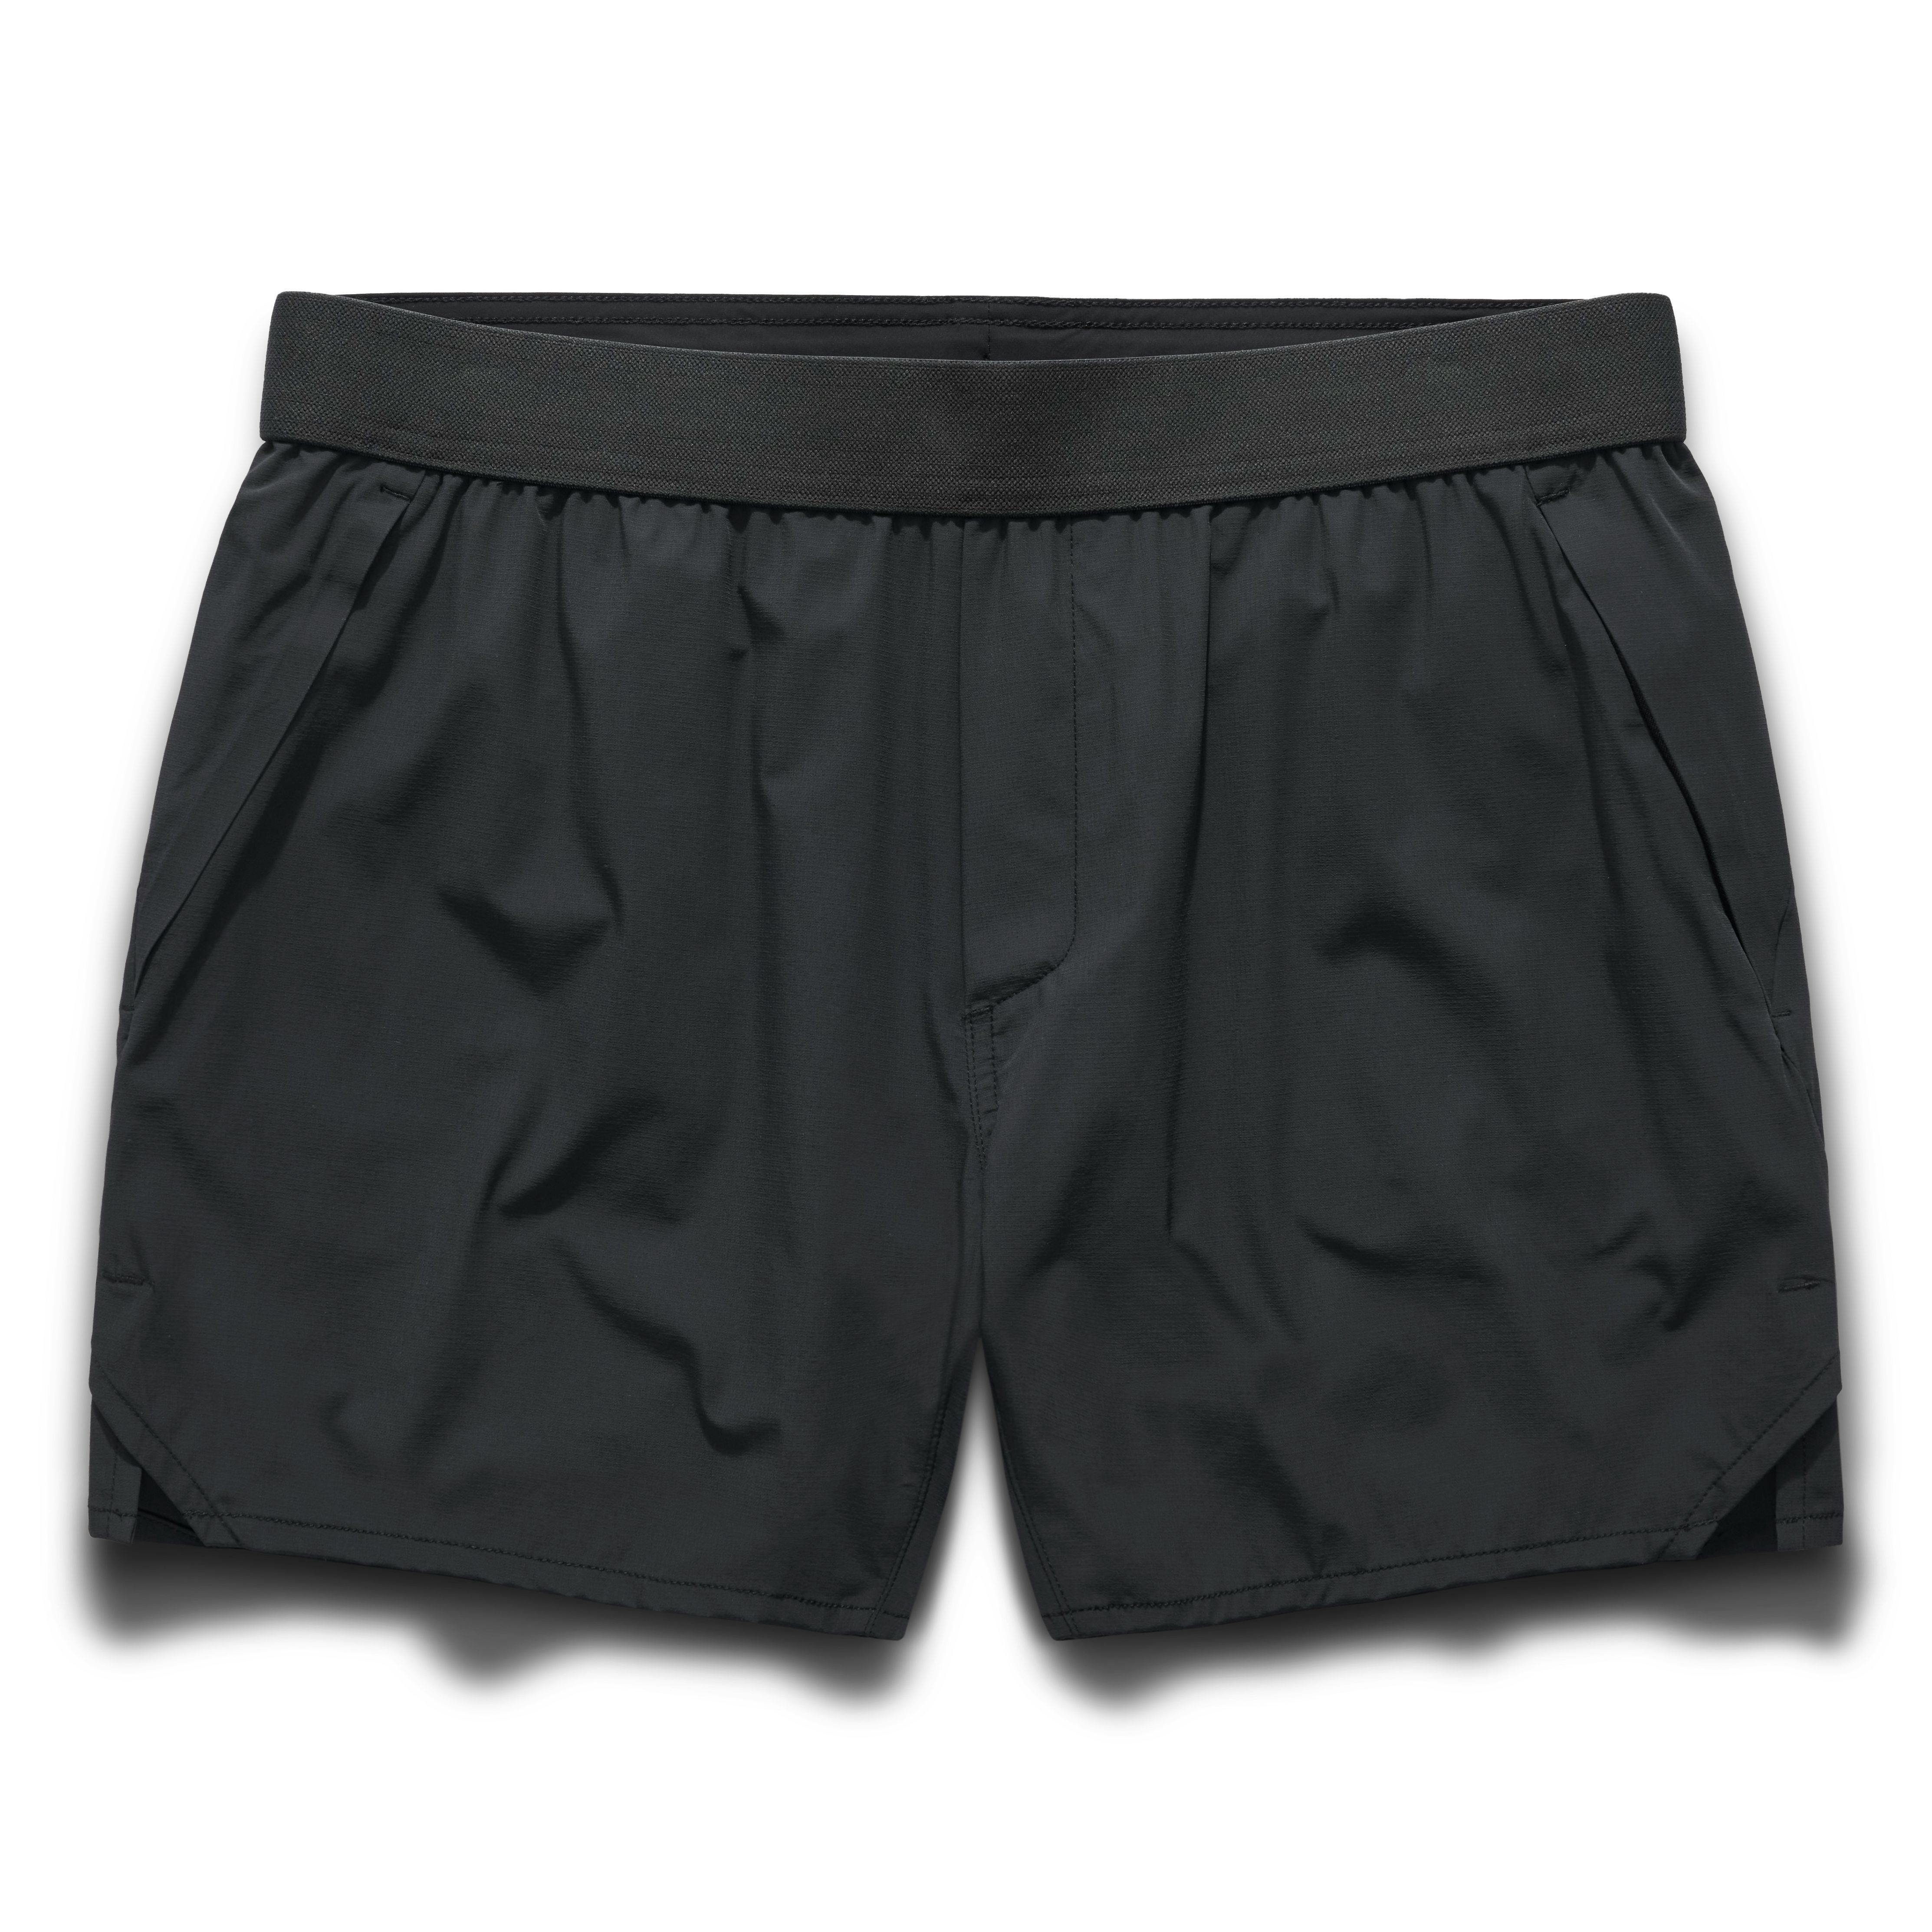 Ten Thousand Tactical Lined Short - 5 - Black, All Train